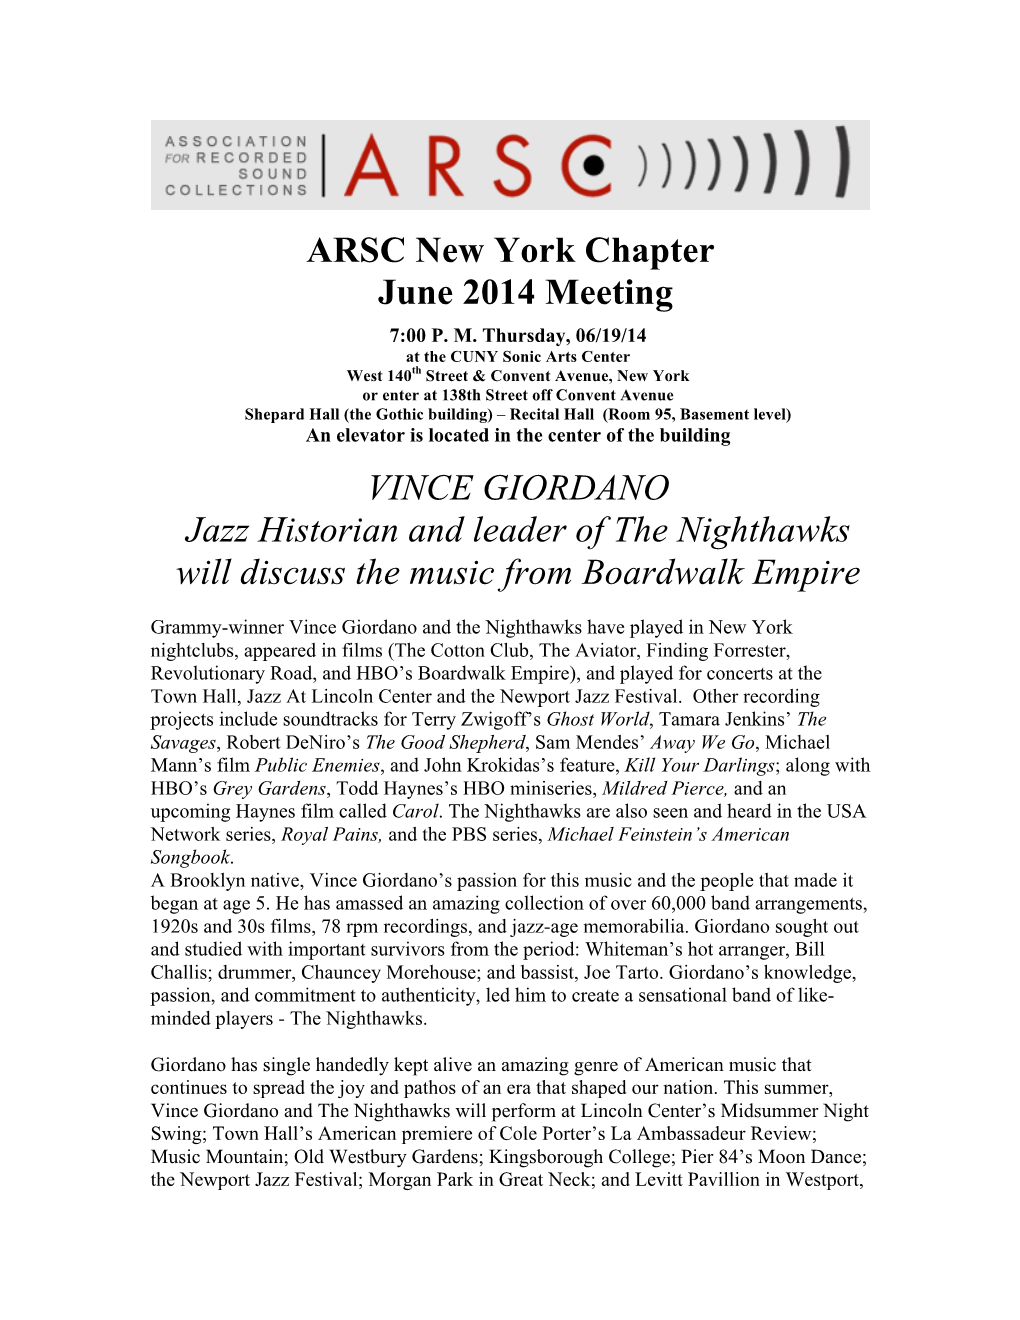 ARSC New York Chapter June 2014 Meeting VINCE GIORDANO Jazz Historian and Leader of the Nighthawks Will Discuss the Music from B